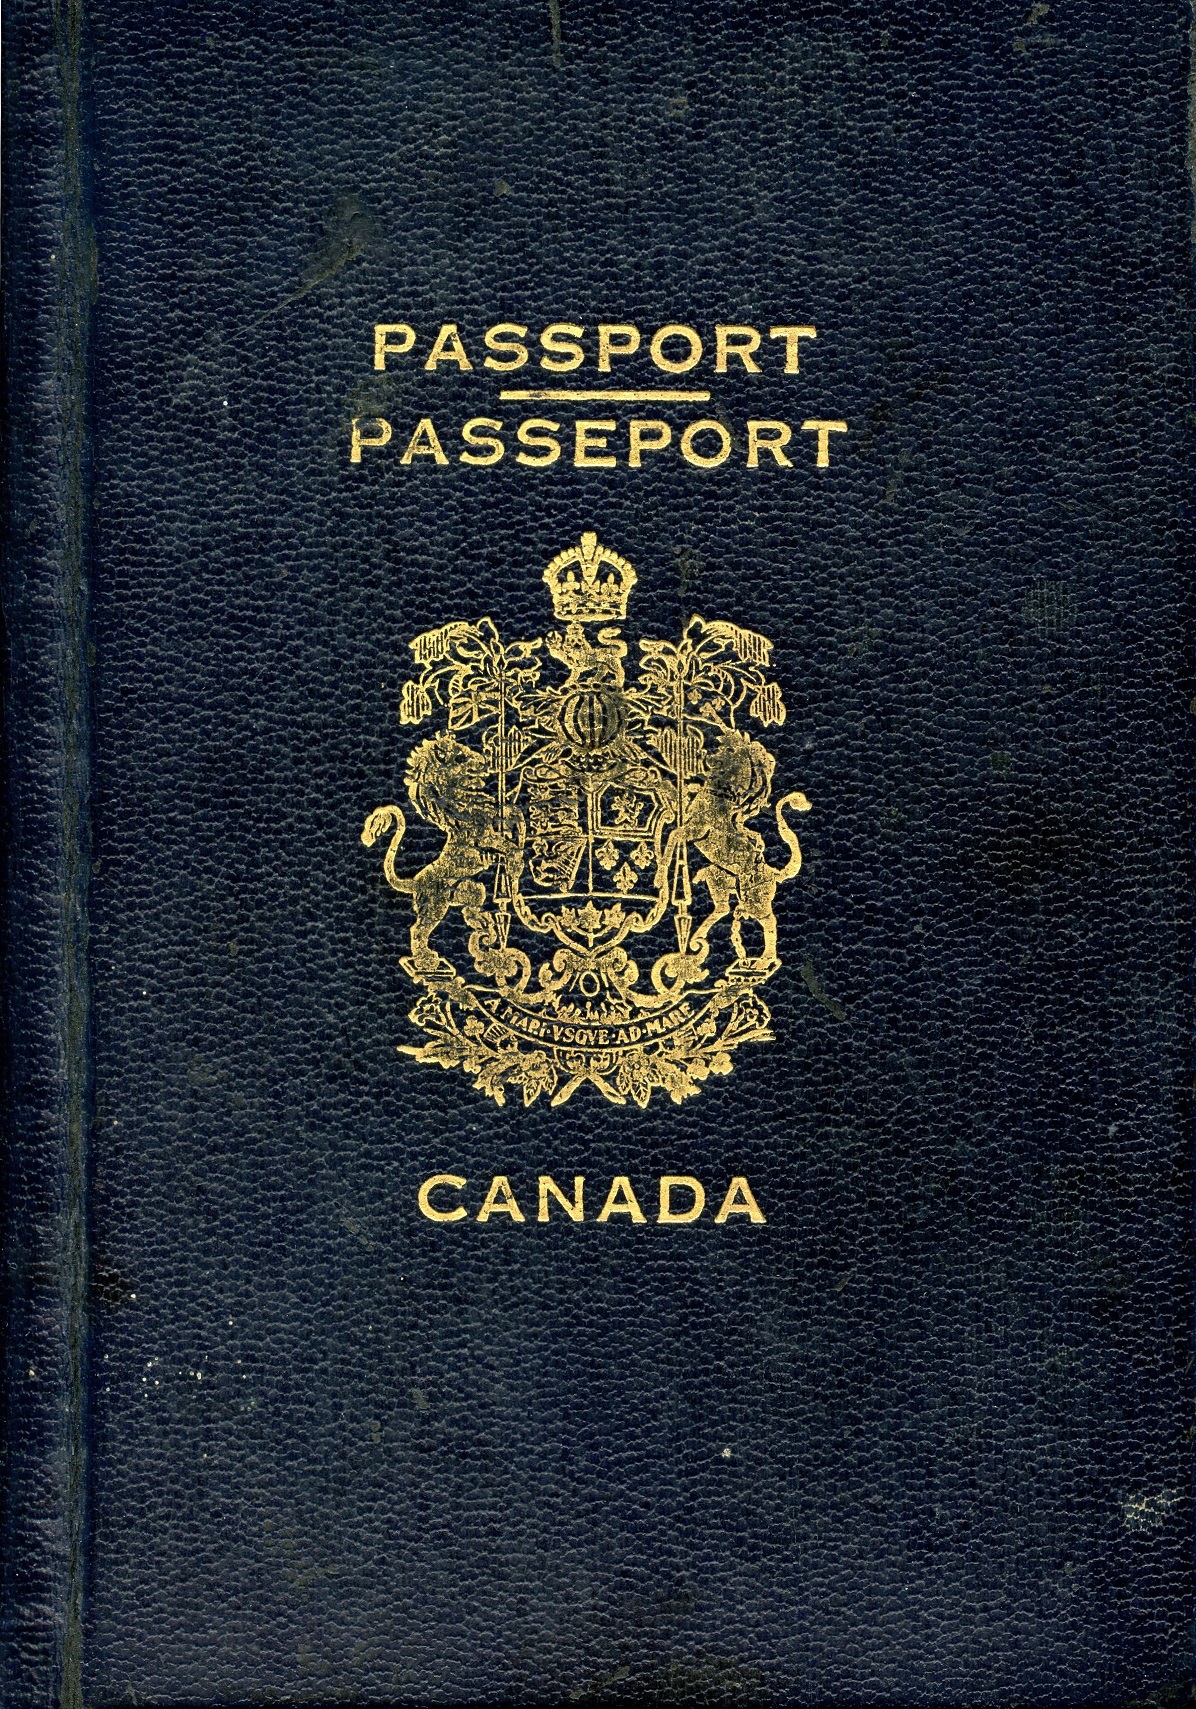 Cover of 1941 Canadian passport